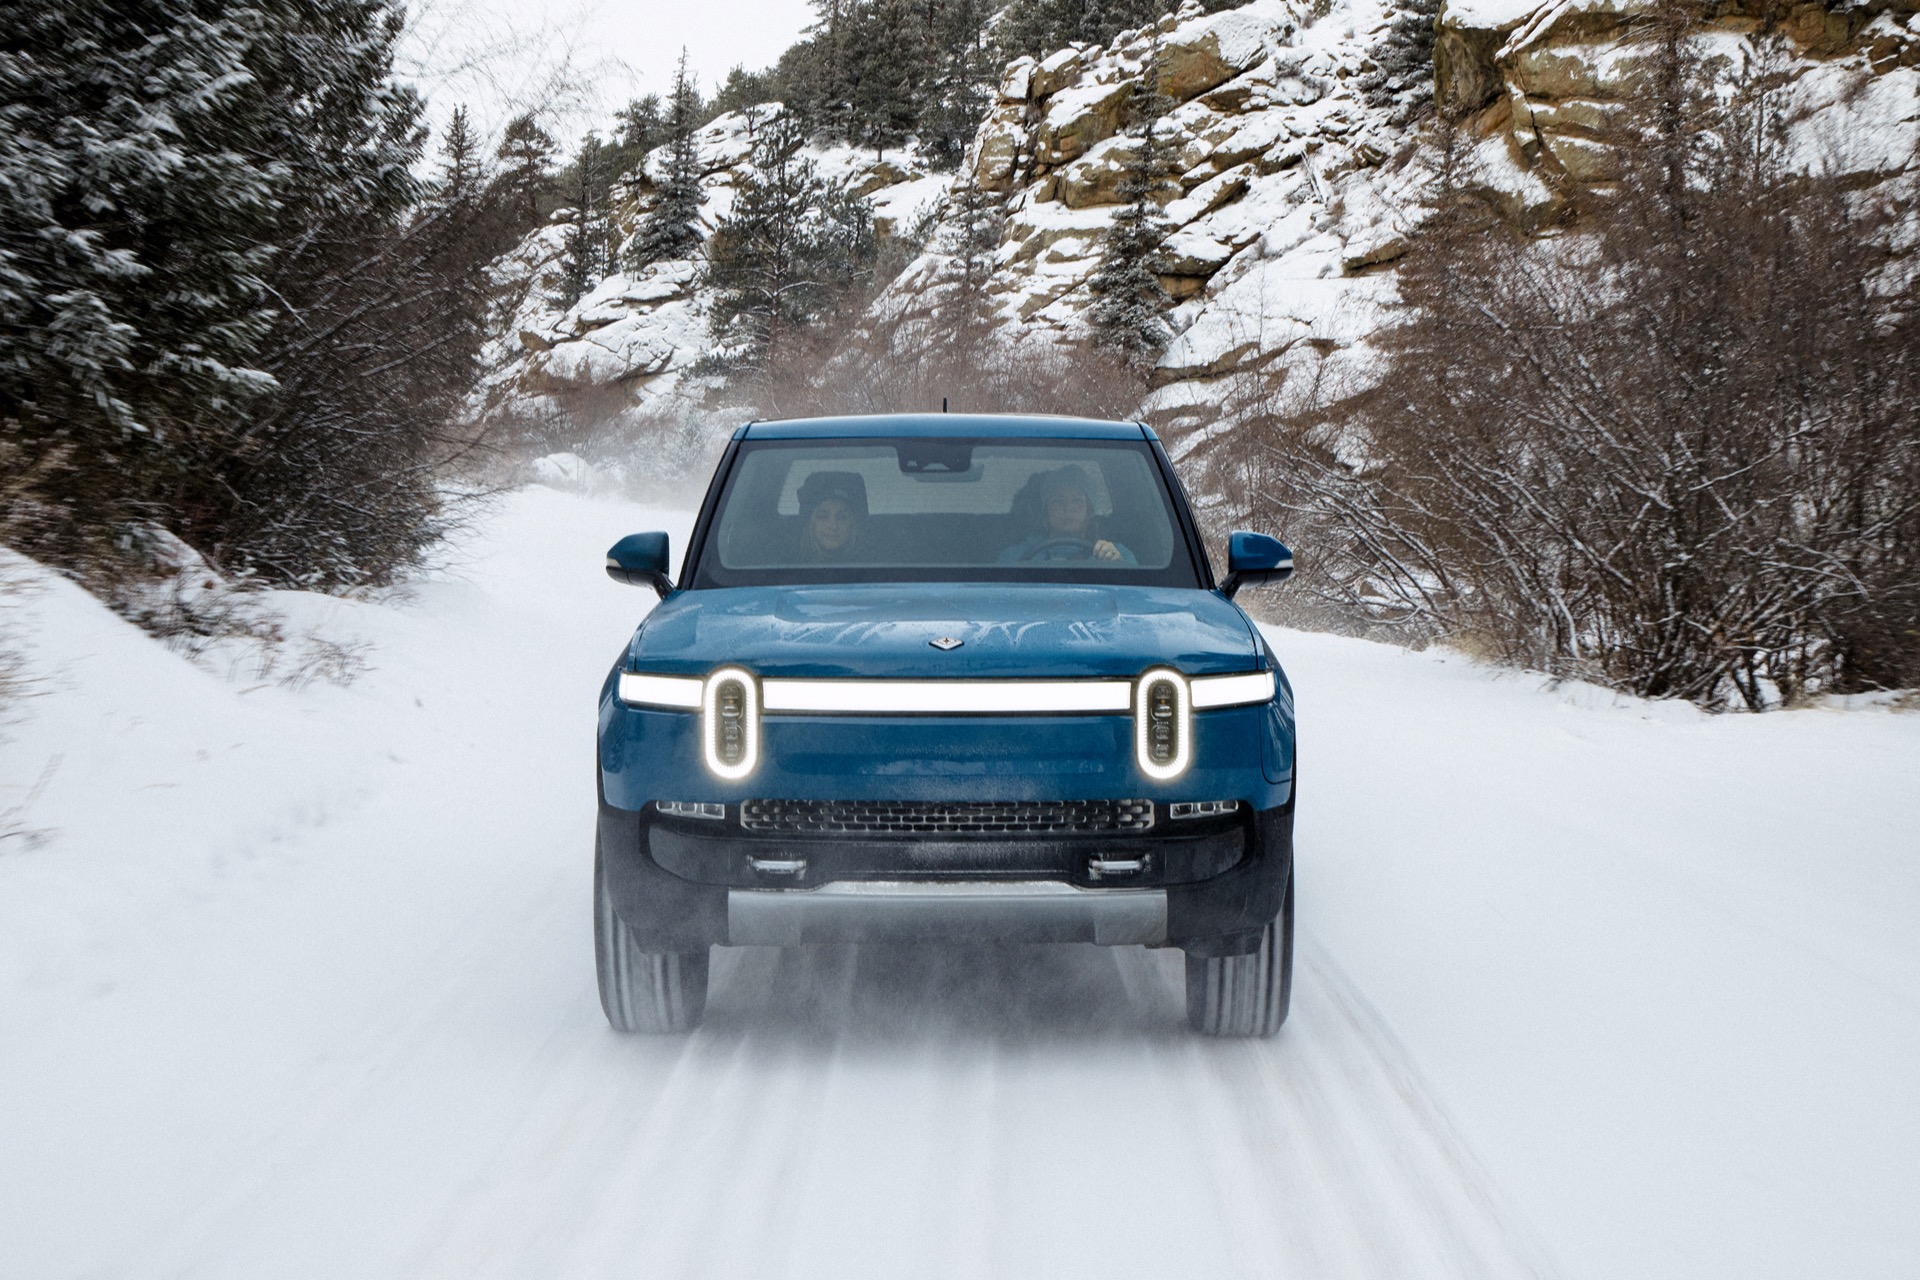 Master Winter Driving: How to Stop on Snow Safely and Effectively